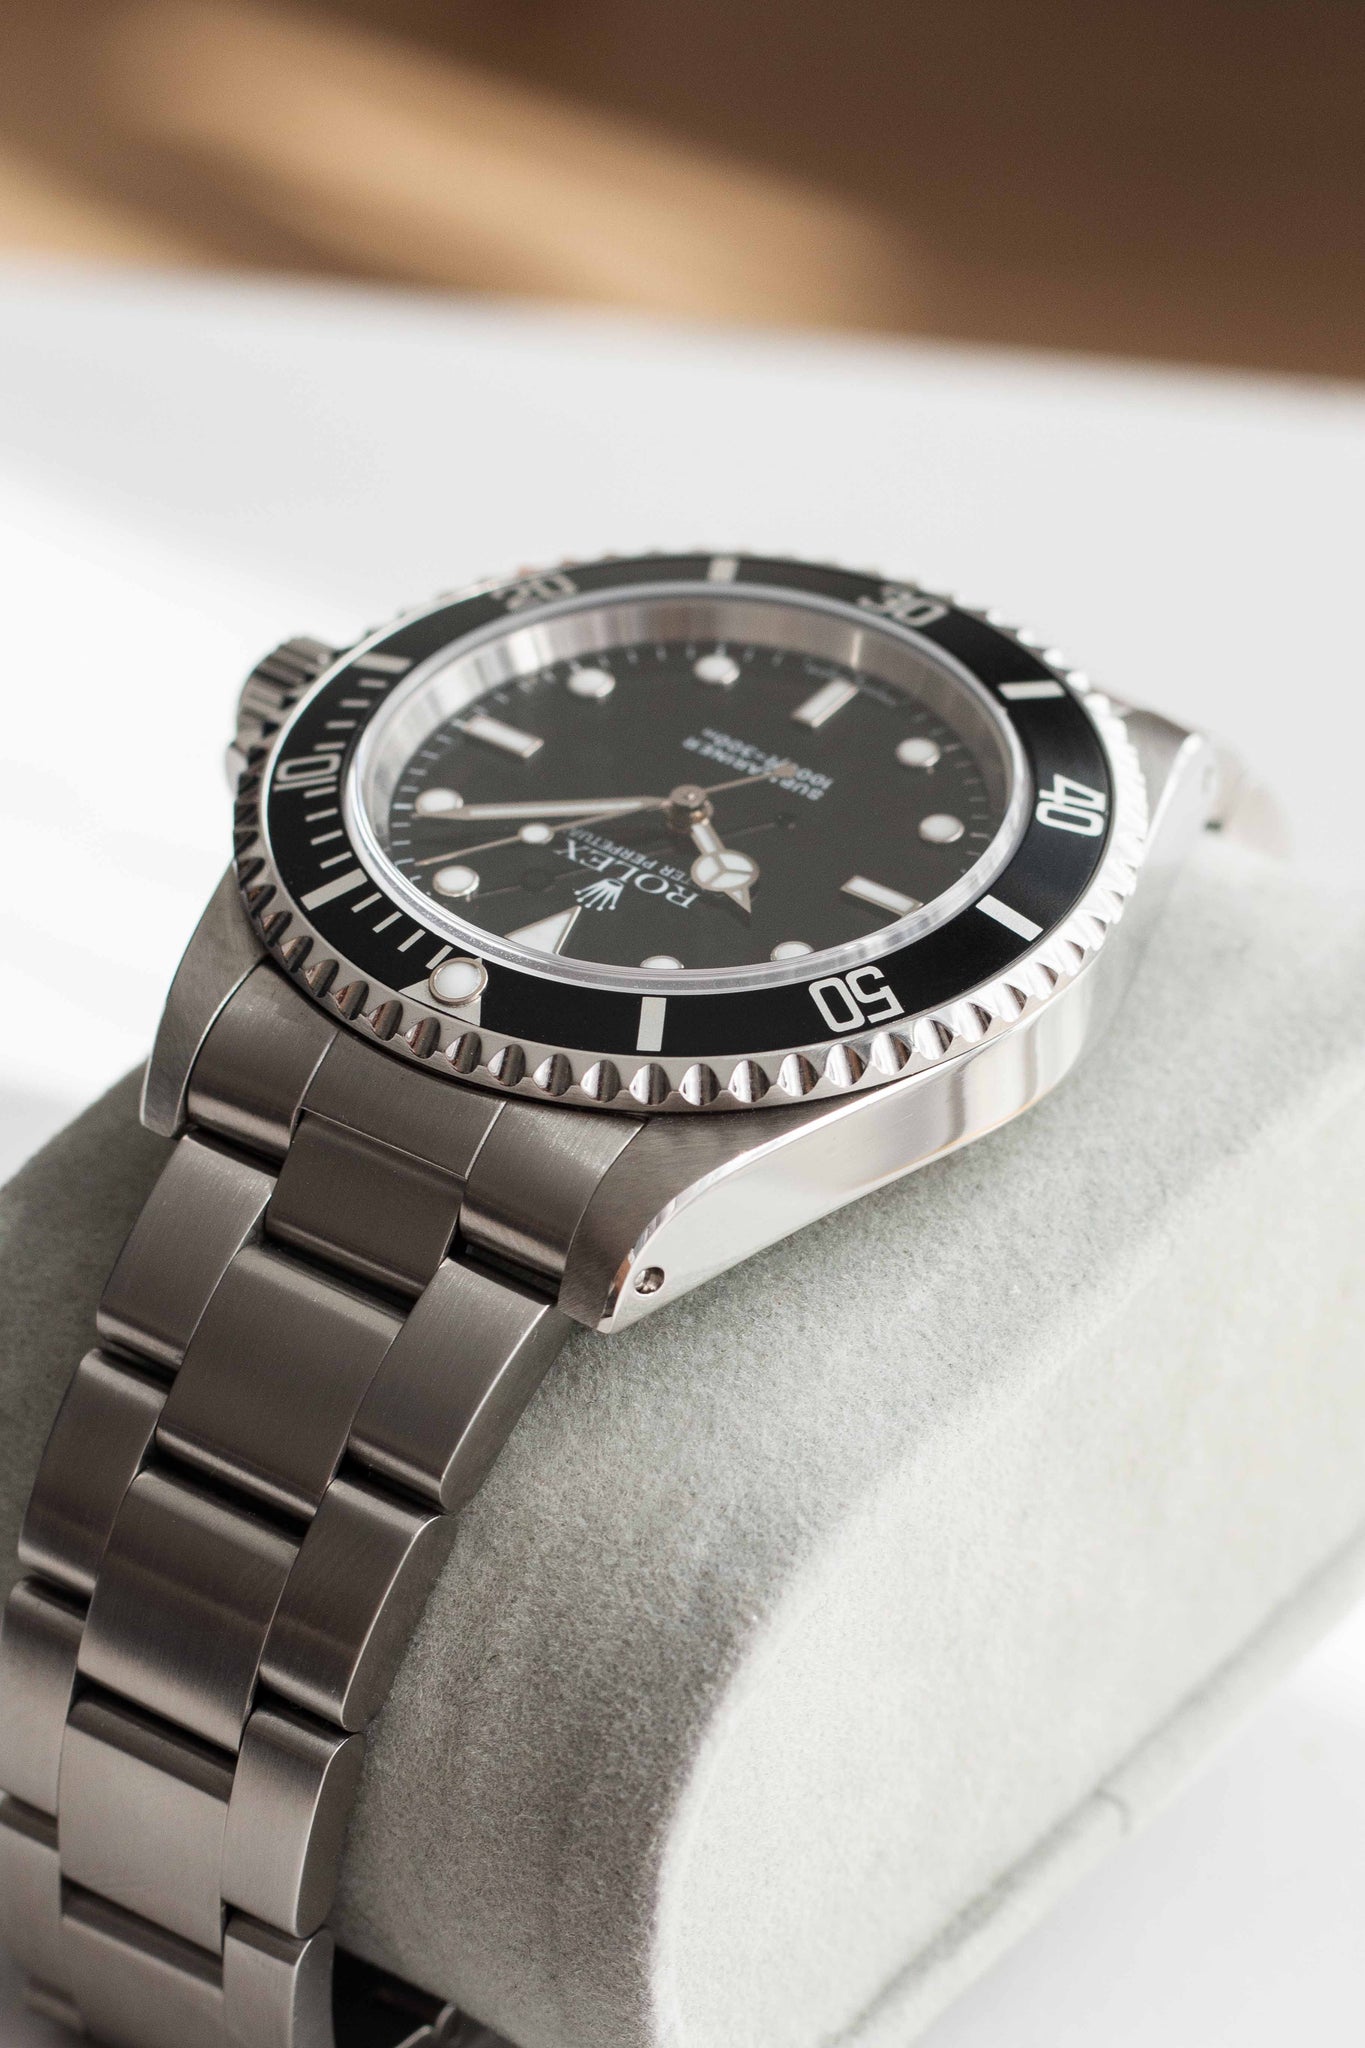 Rolex Submariner Ref. 14060M No Date 2000 w/ Box & Service Papers